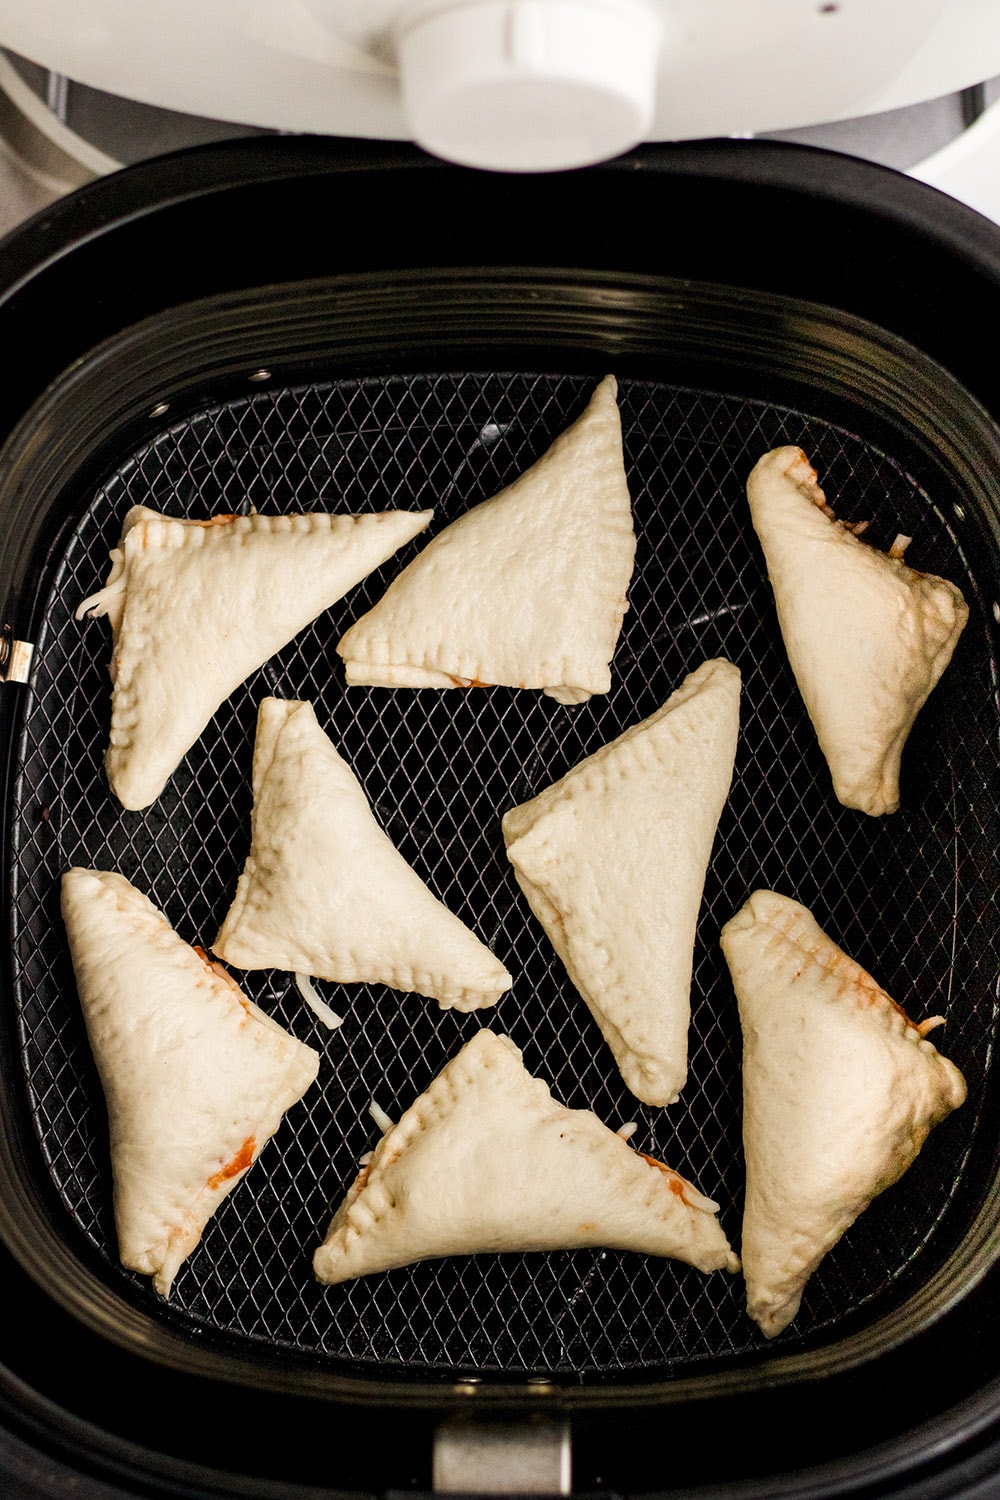 Sealed pizza pockets in an air fryer.